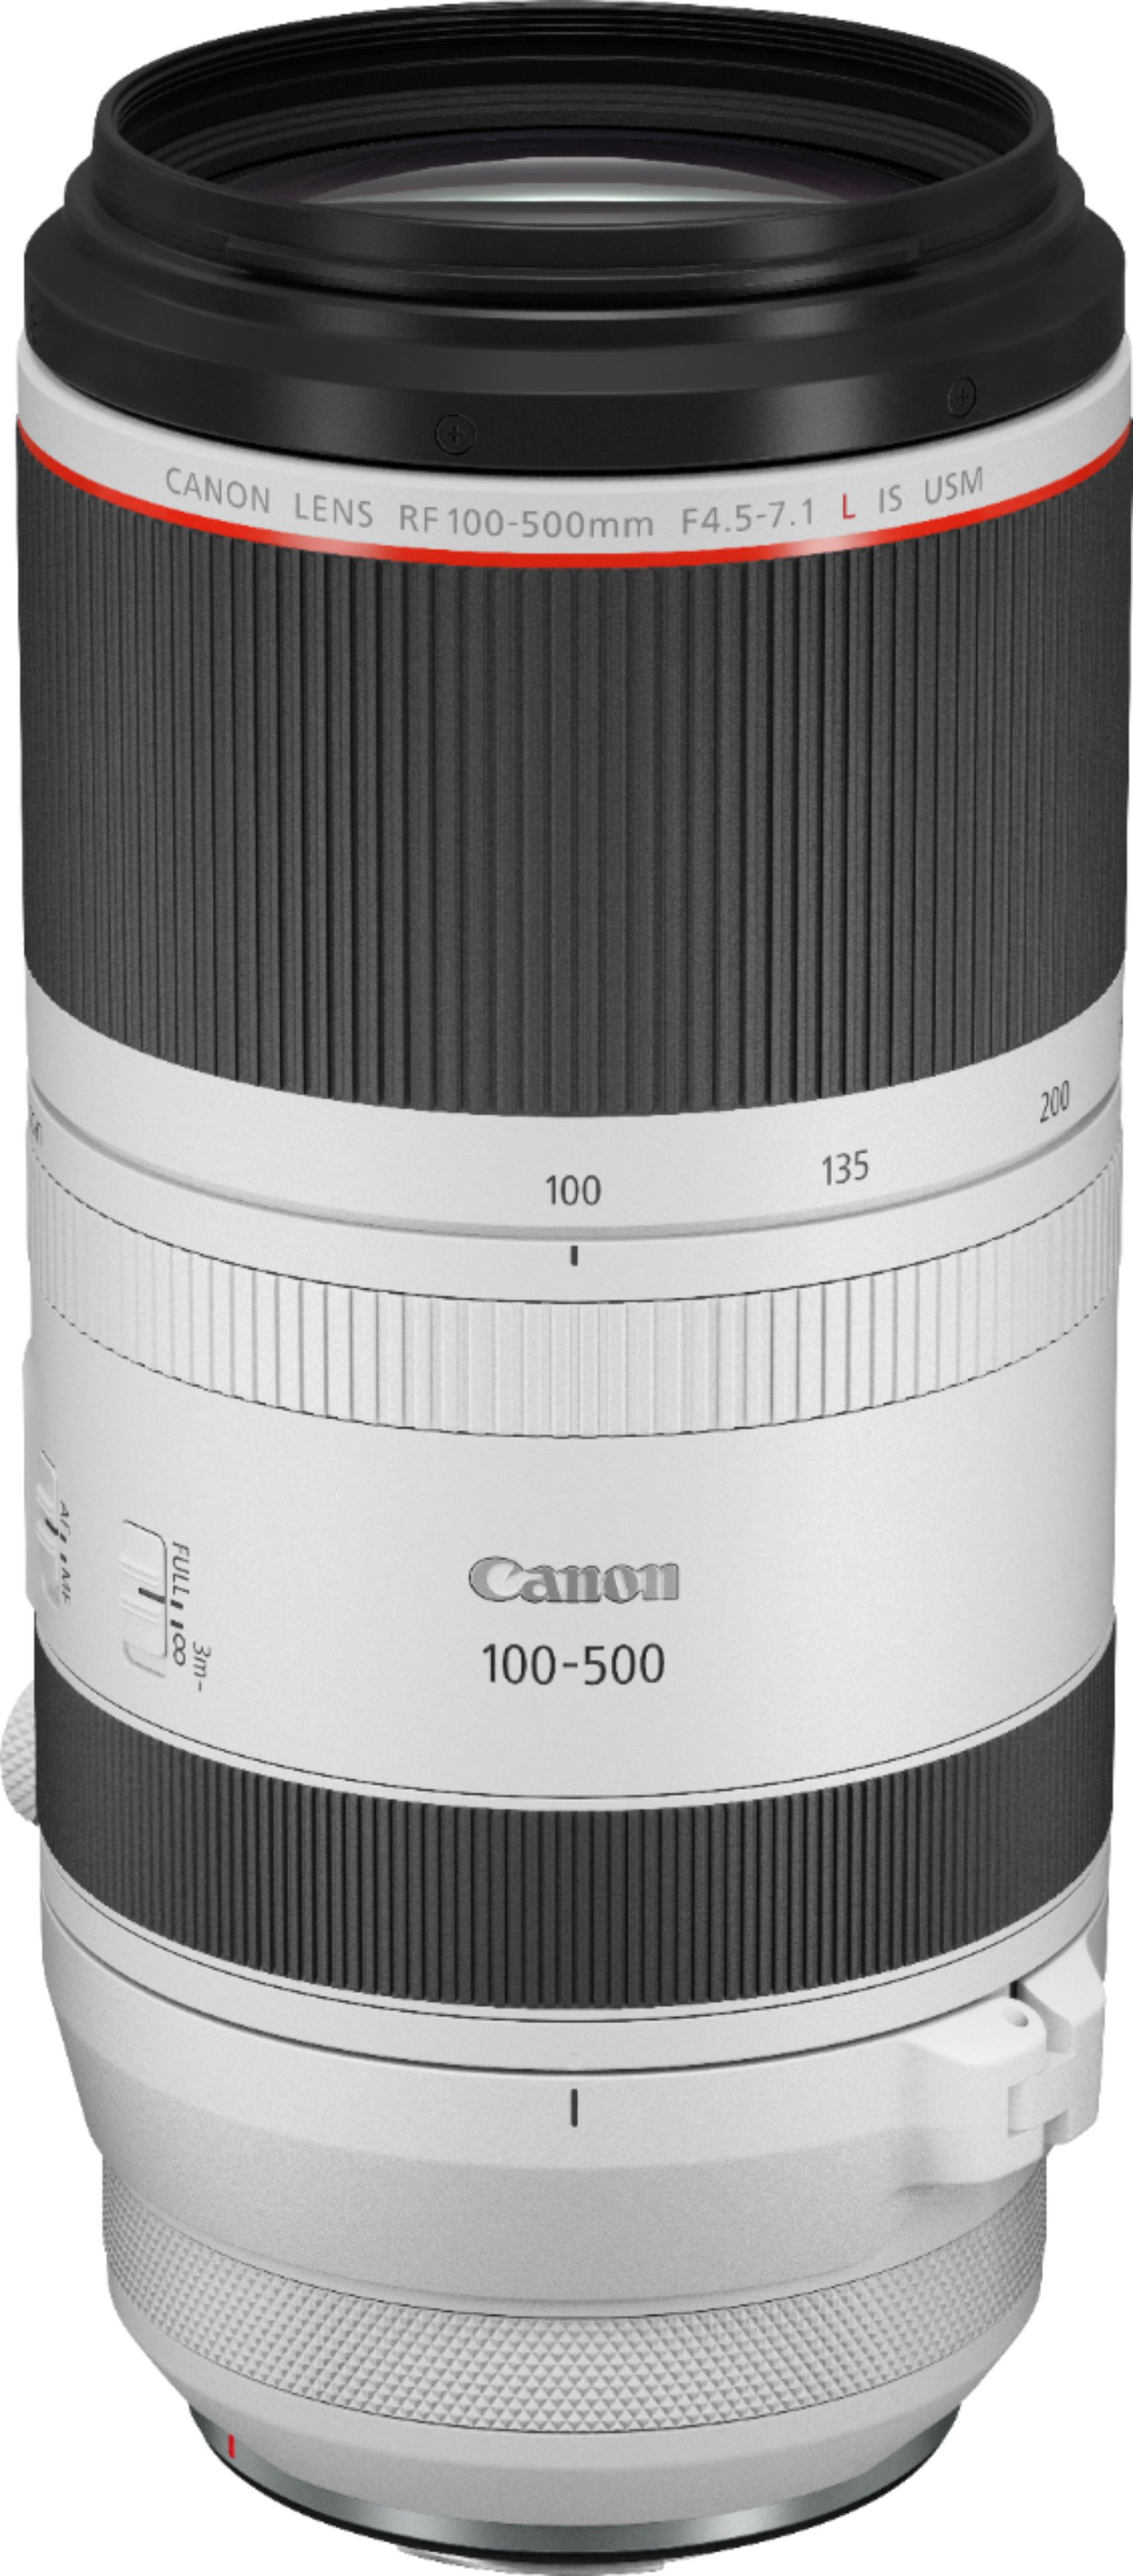 Canon RF100-500mm F4.5-7.1 L IS USM Telephoto Zoom Lens for EOS R-Series  Cameras White 4112C002 - Best Buy